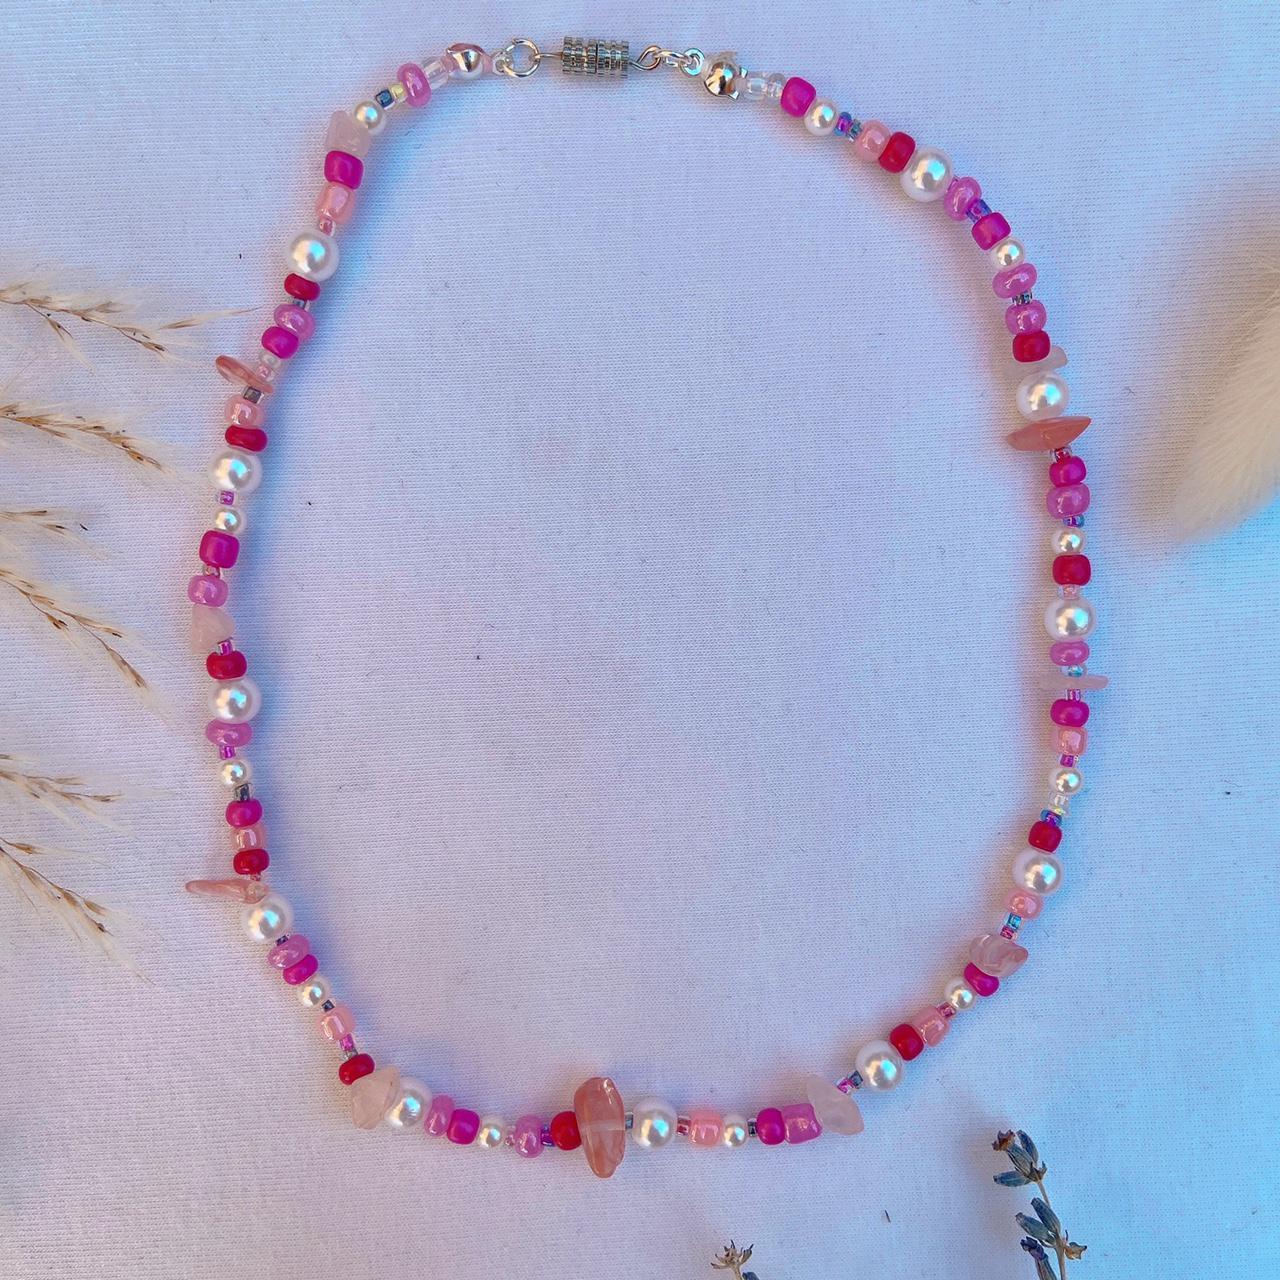 Product Image 1 - handmade beaded pink-combi necklace 💖

gem-stoned